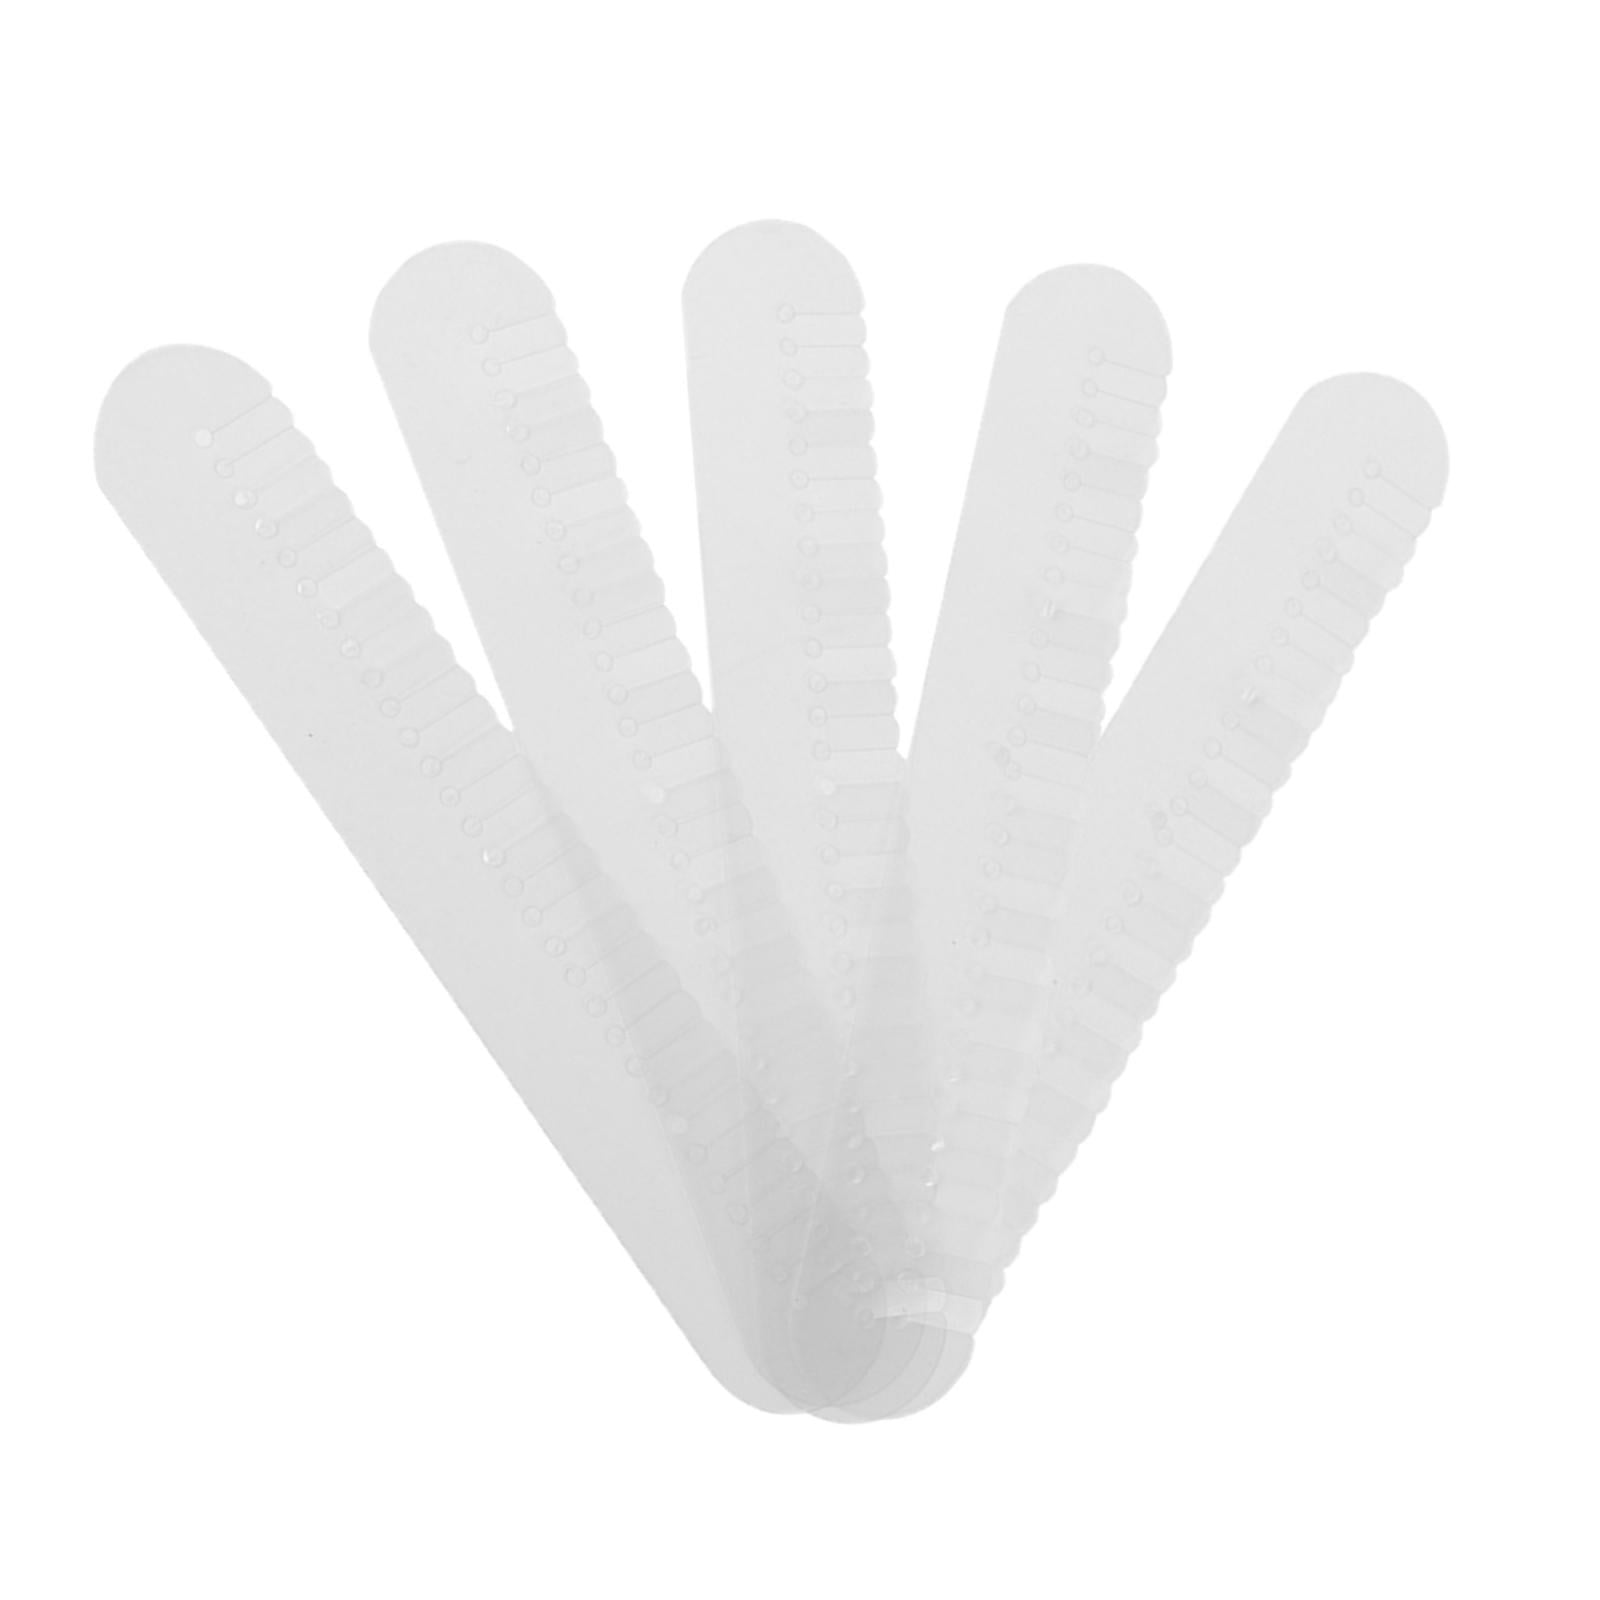 3 Pcs Silicone Finger Protector Guard For Hot Fusion Glue Bonded Hair Extensions 